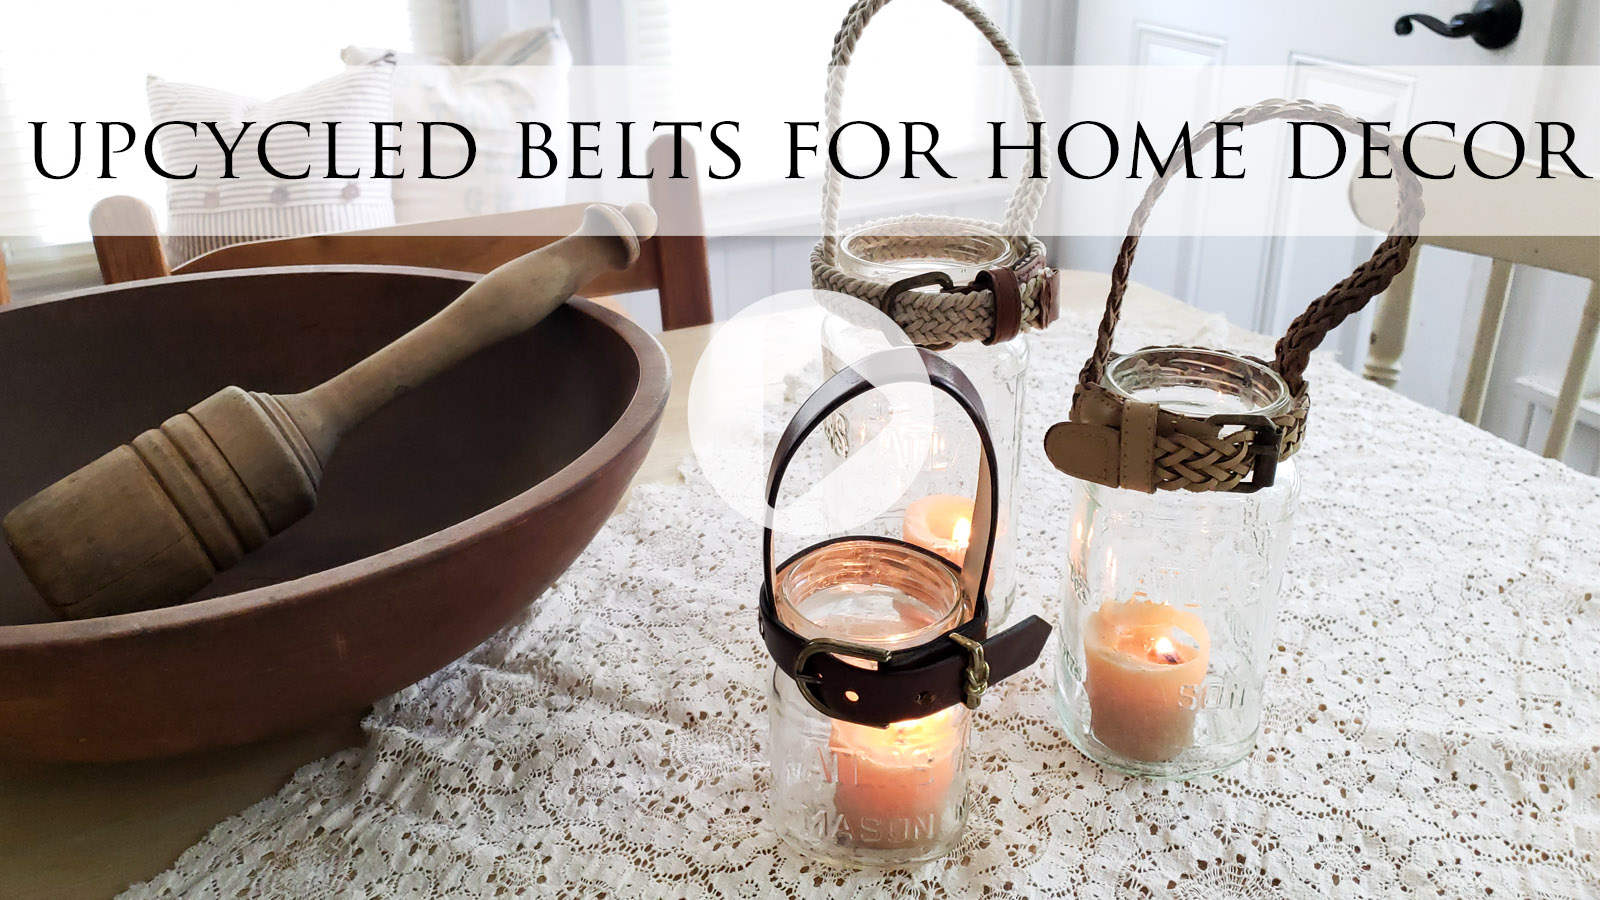 DIY Video Tutorial for Upcycled Belts in Home Decor by Larissa of Prodigal Pieces | prodigalpieces.com #prodigalpieces